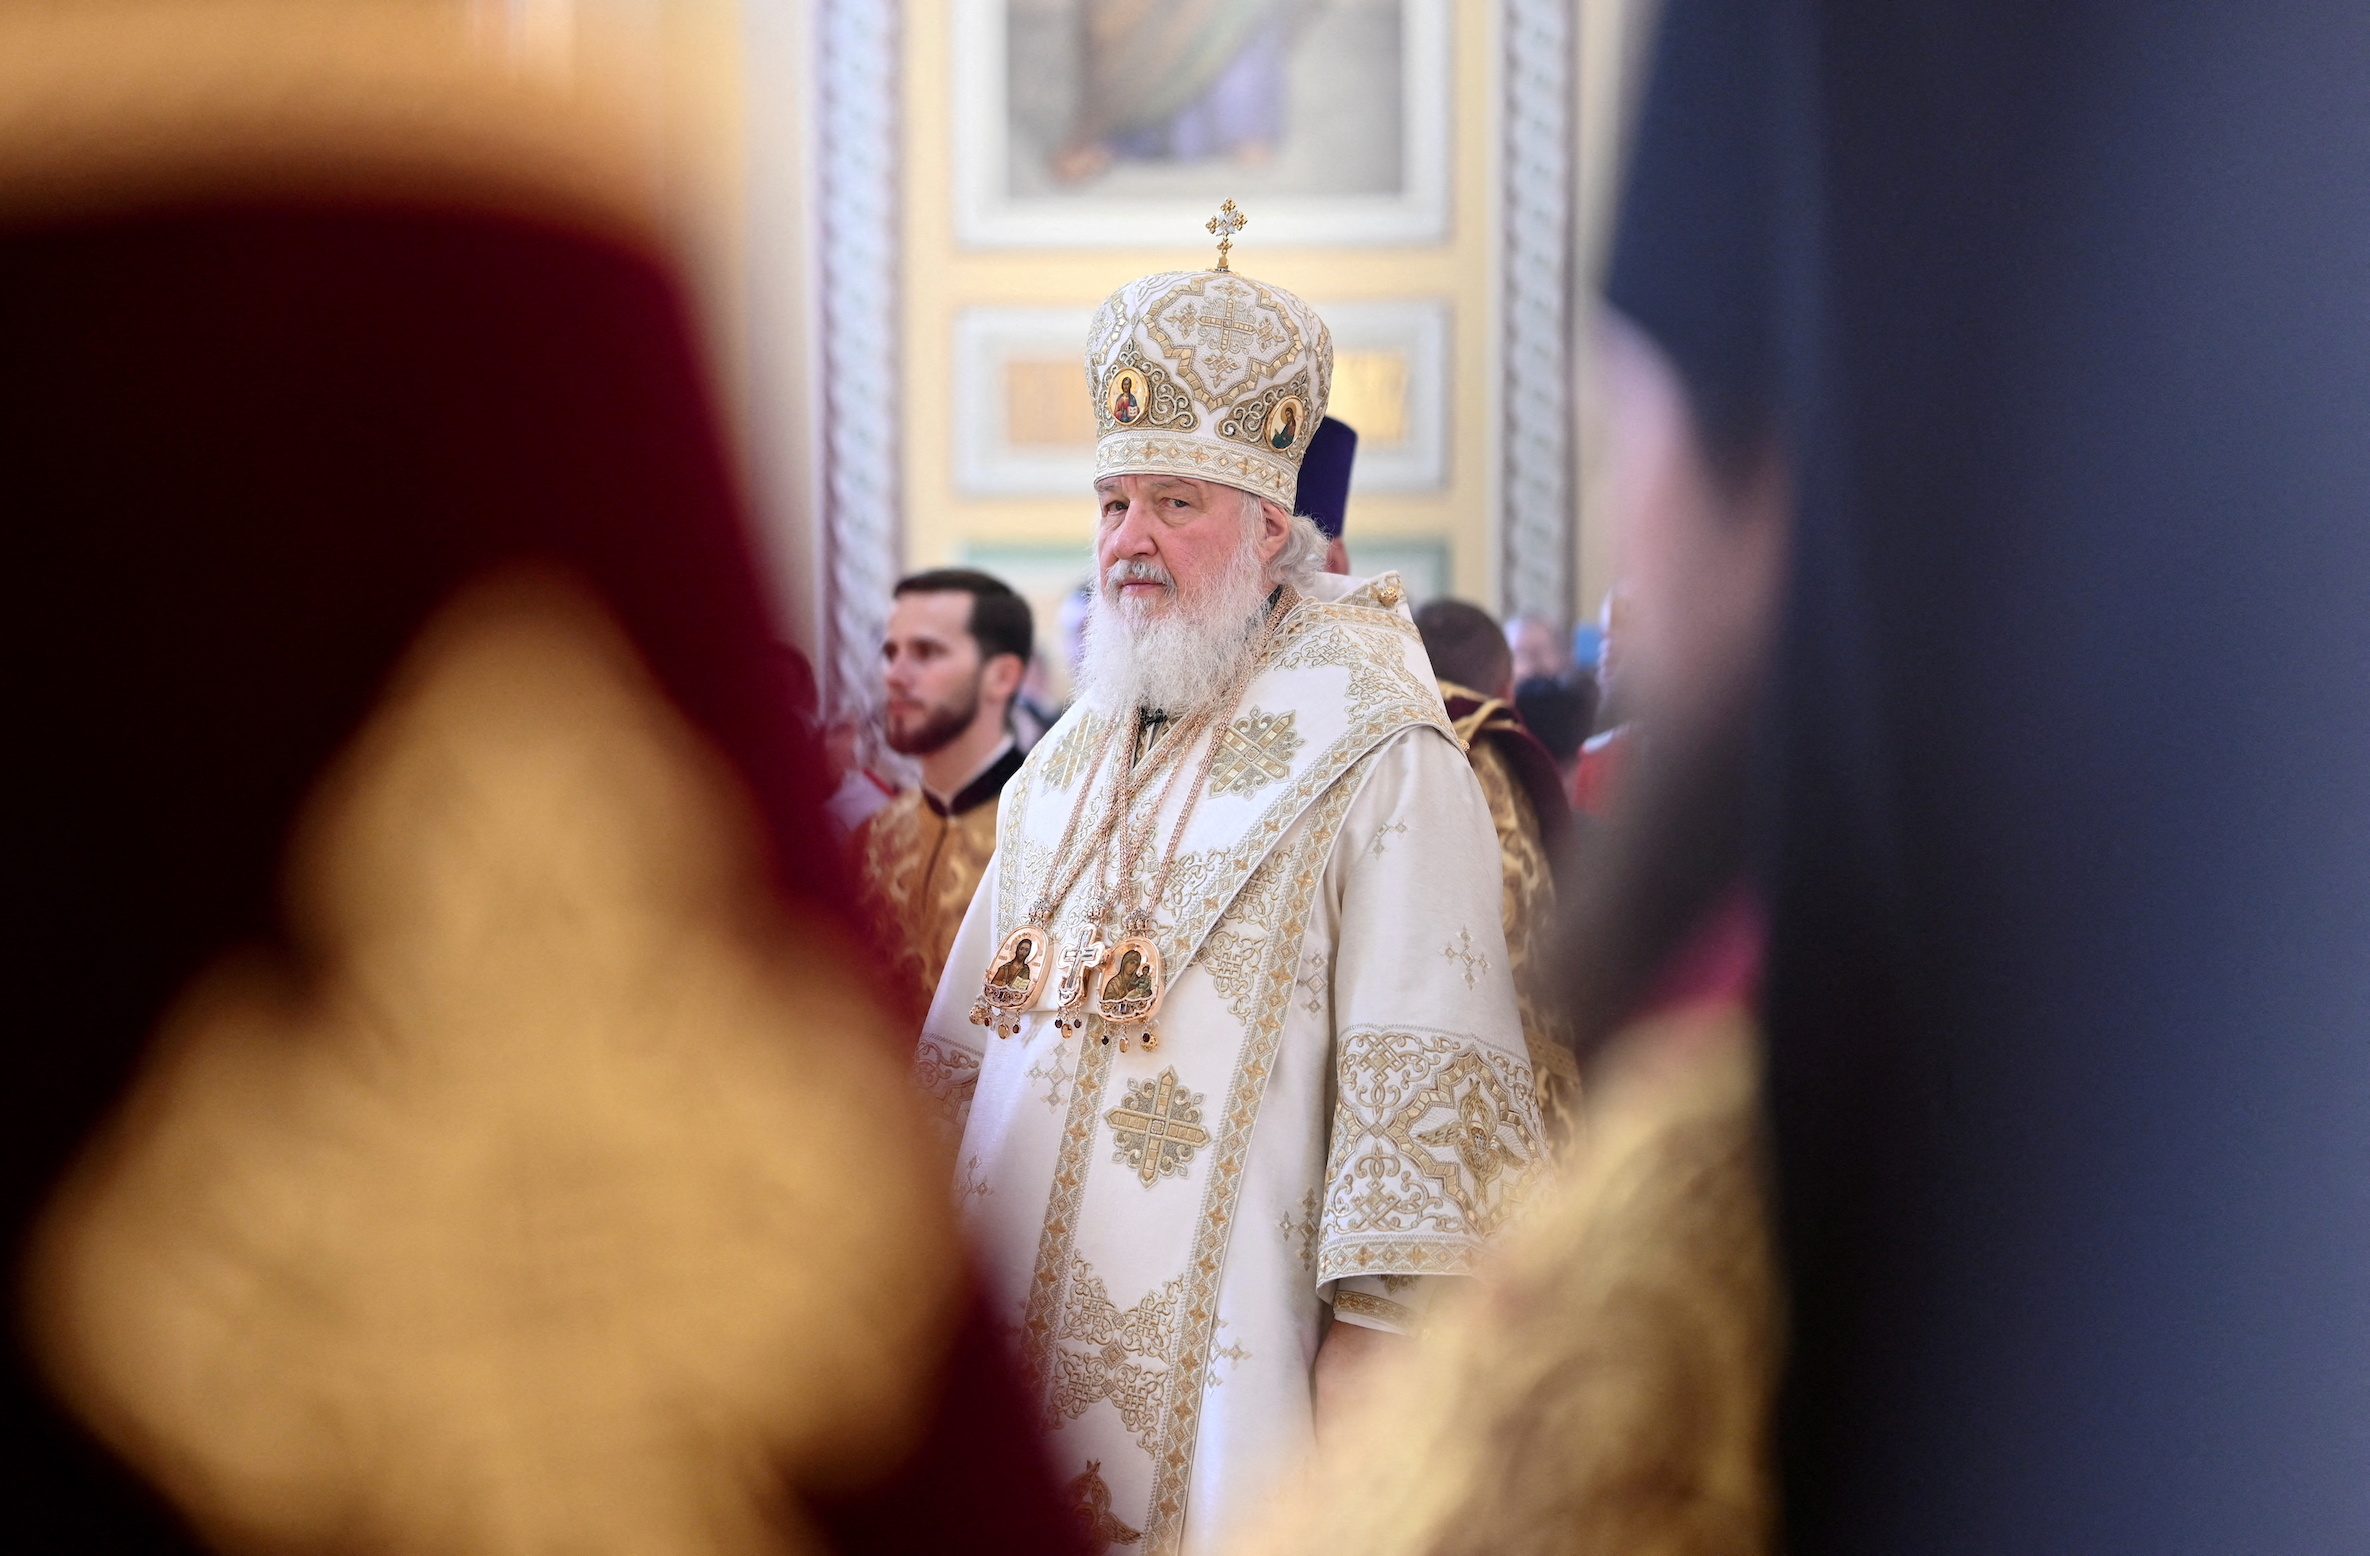 Russian Orthodox Church scolds Pope Francis after ‘Putin’s altar boy’ remark